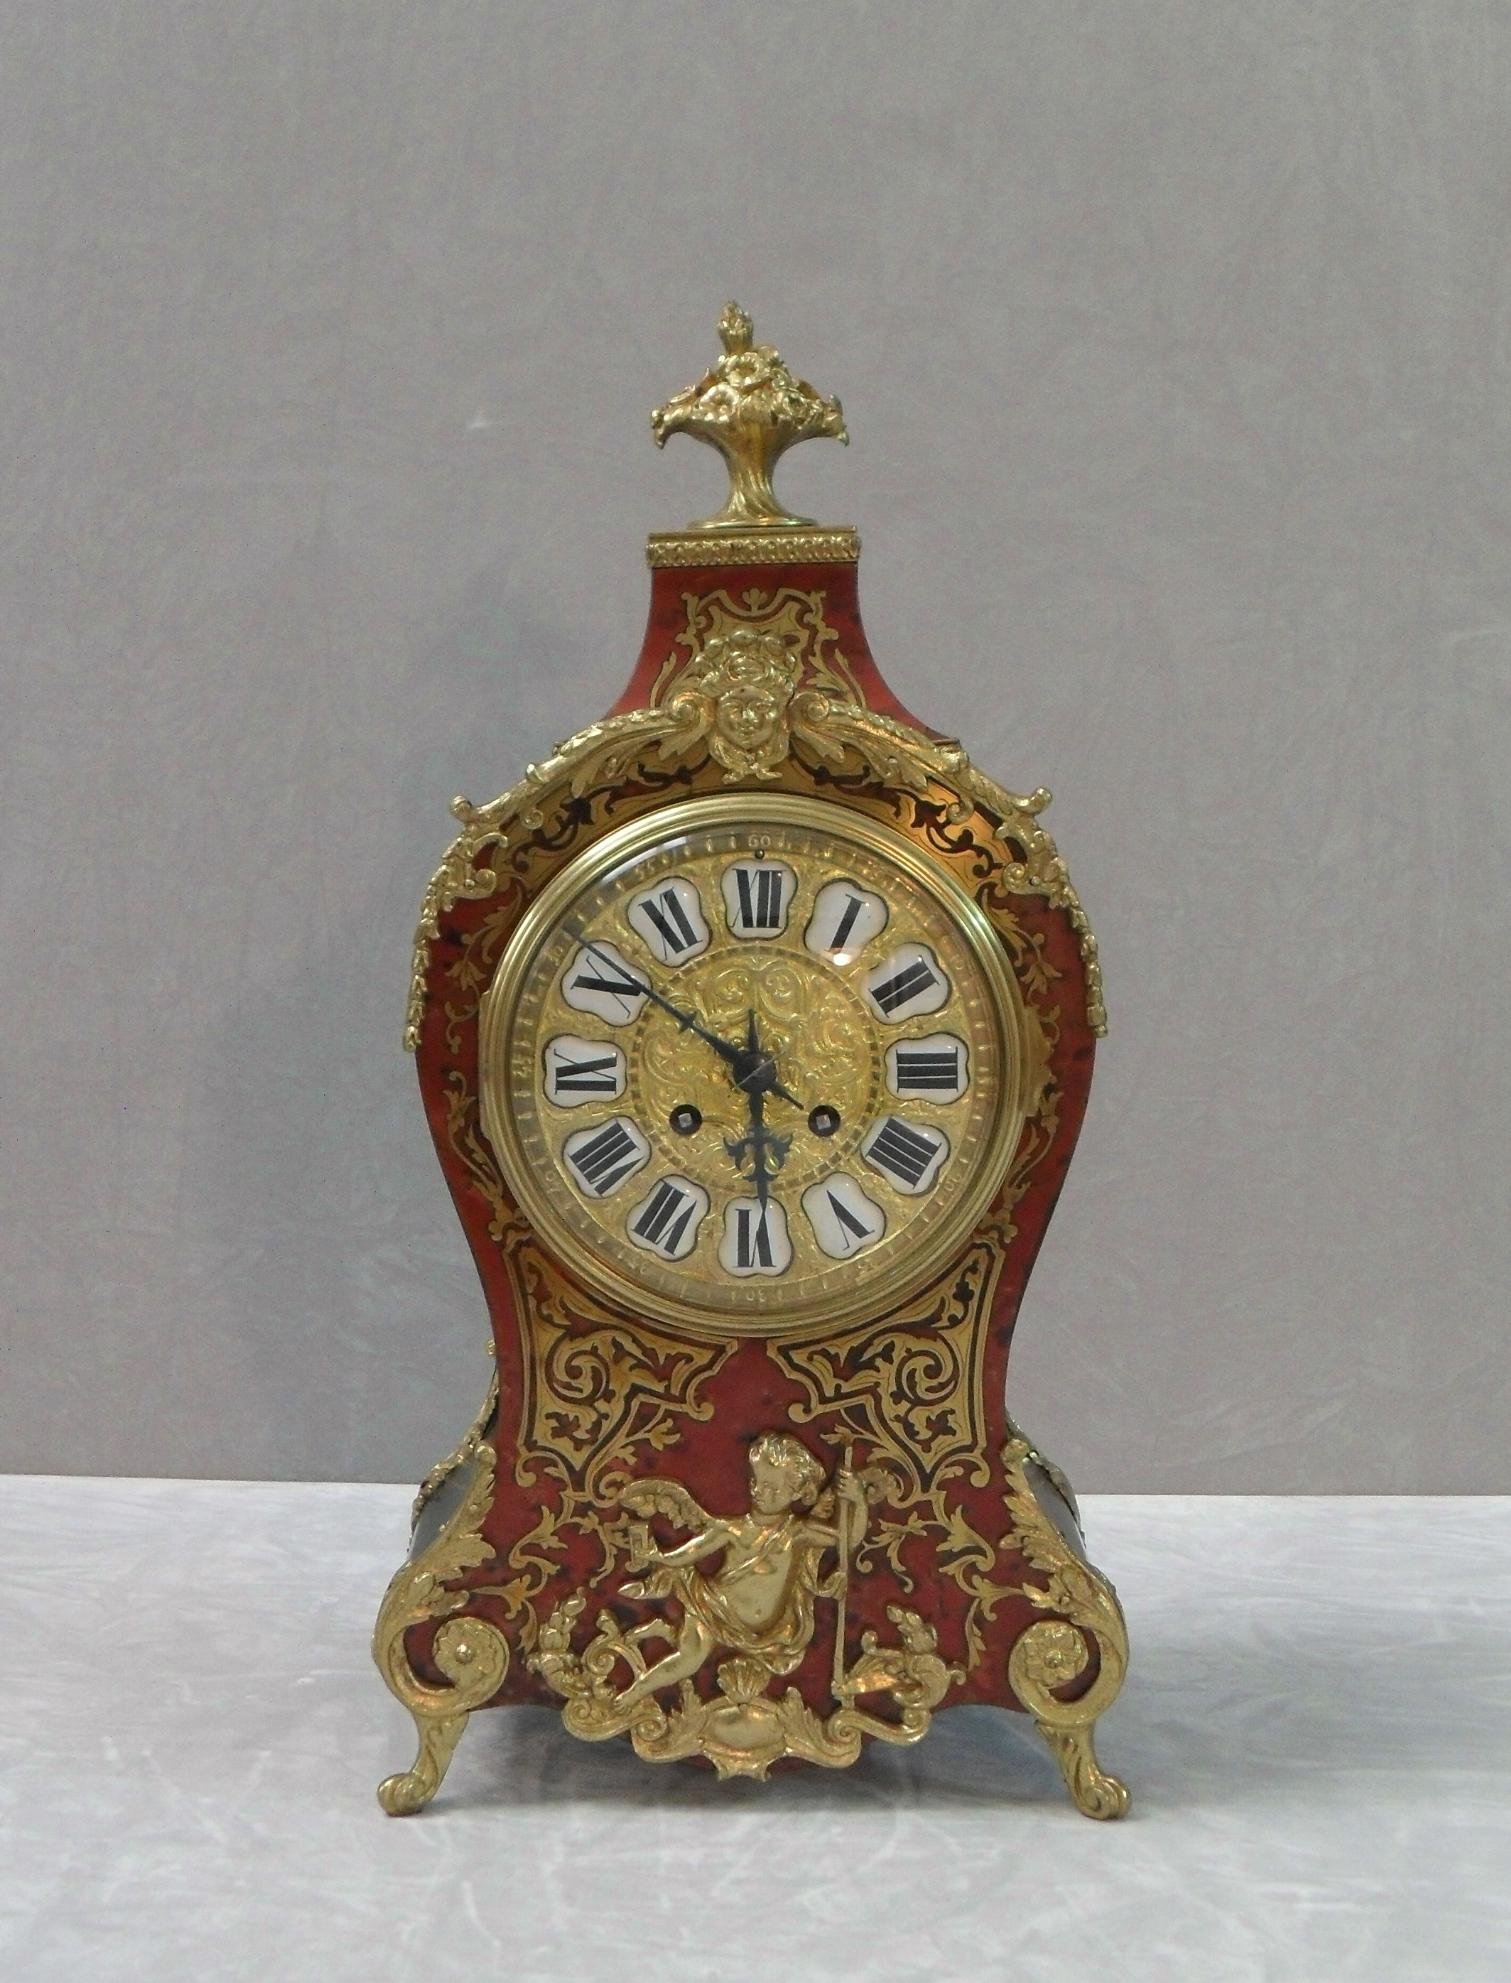 A very good quality French Louis XV style boulle red tortoiseshell and brass inlaid mantel clock with ebonized sides. The clock has decorative foliate bronze gilt ormolu mounts and moulds with cherub mount to the front, finished with floral urn to